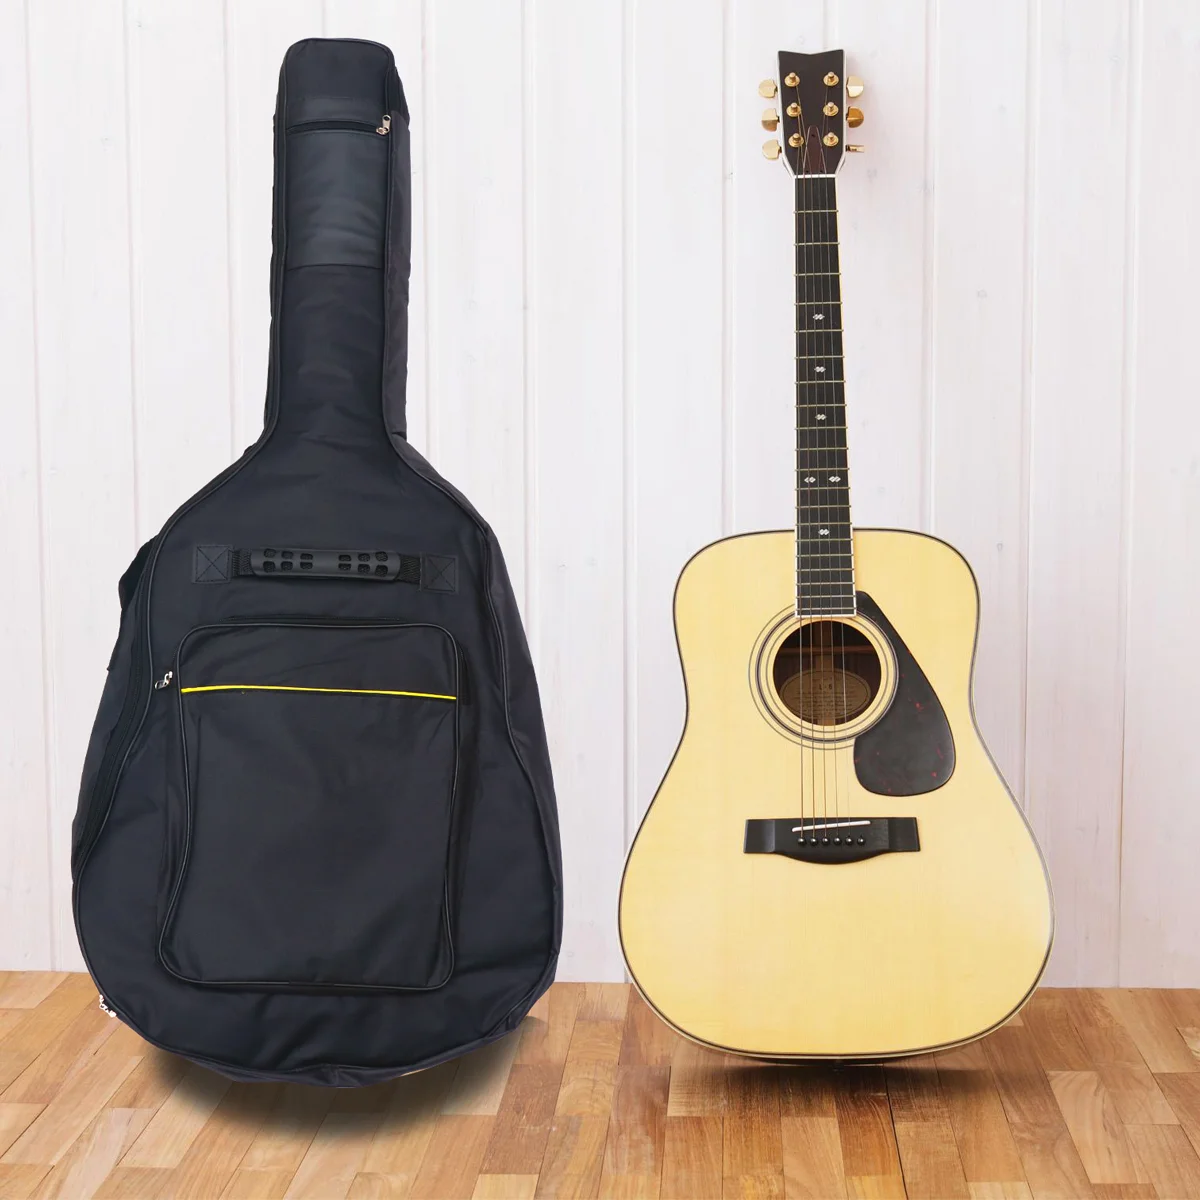 

Guitar Case Gig Electric Carry Acoustic Bass Backpack Sponge Padded Dreadnought Storage Tote Hard 41 Double Strap Diaper bags